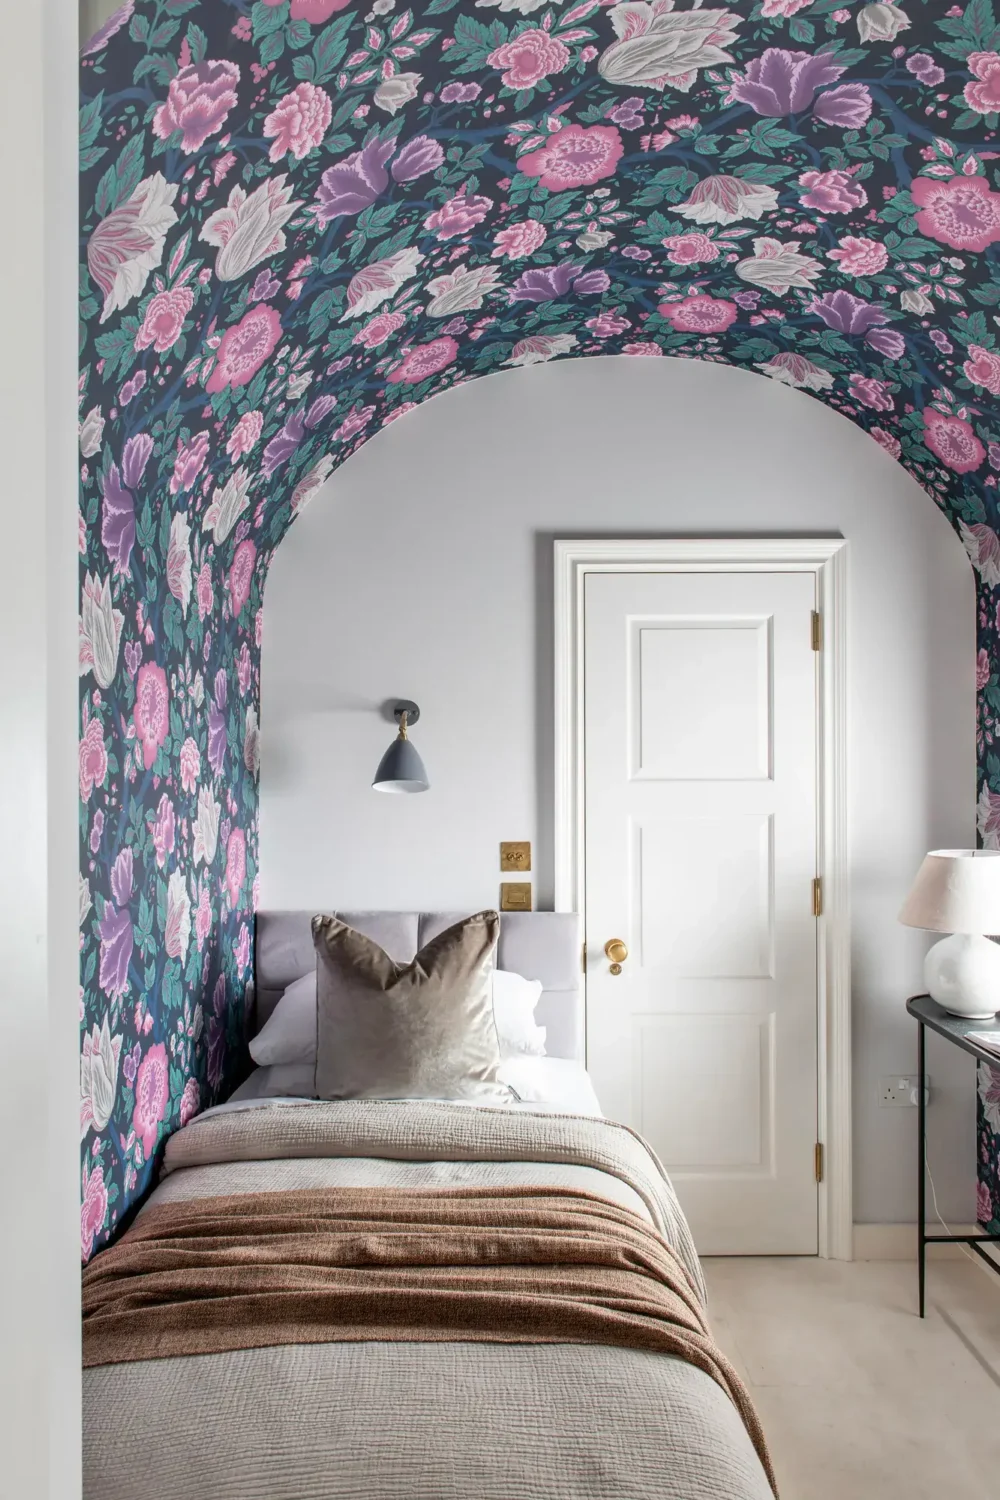 bedroom-rounded-arched-ceiling-floral-wallpaper-nordroom